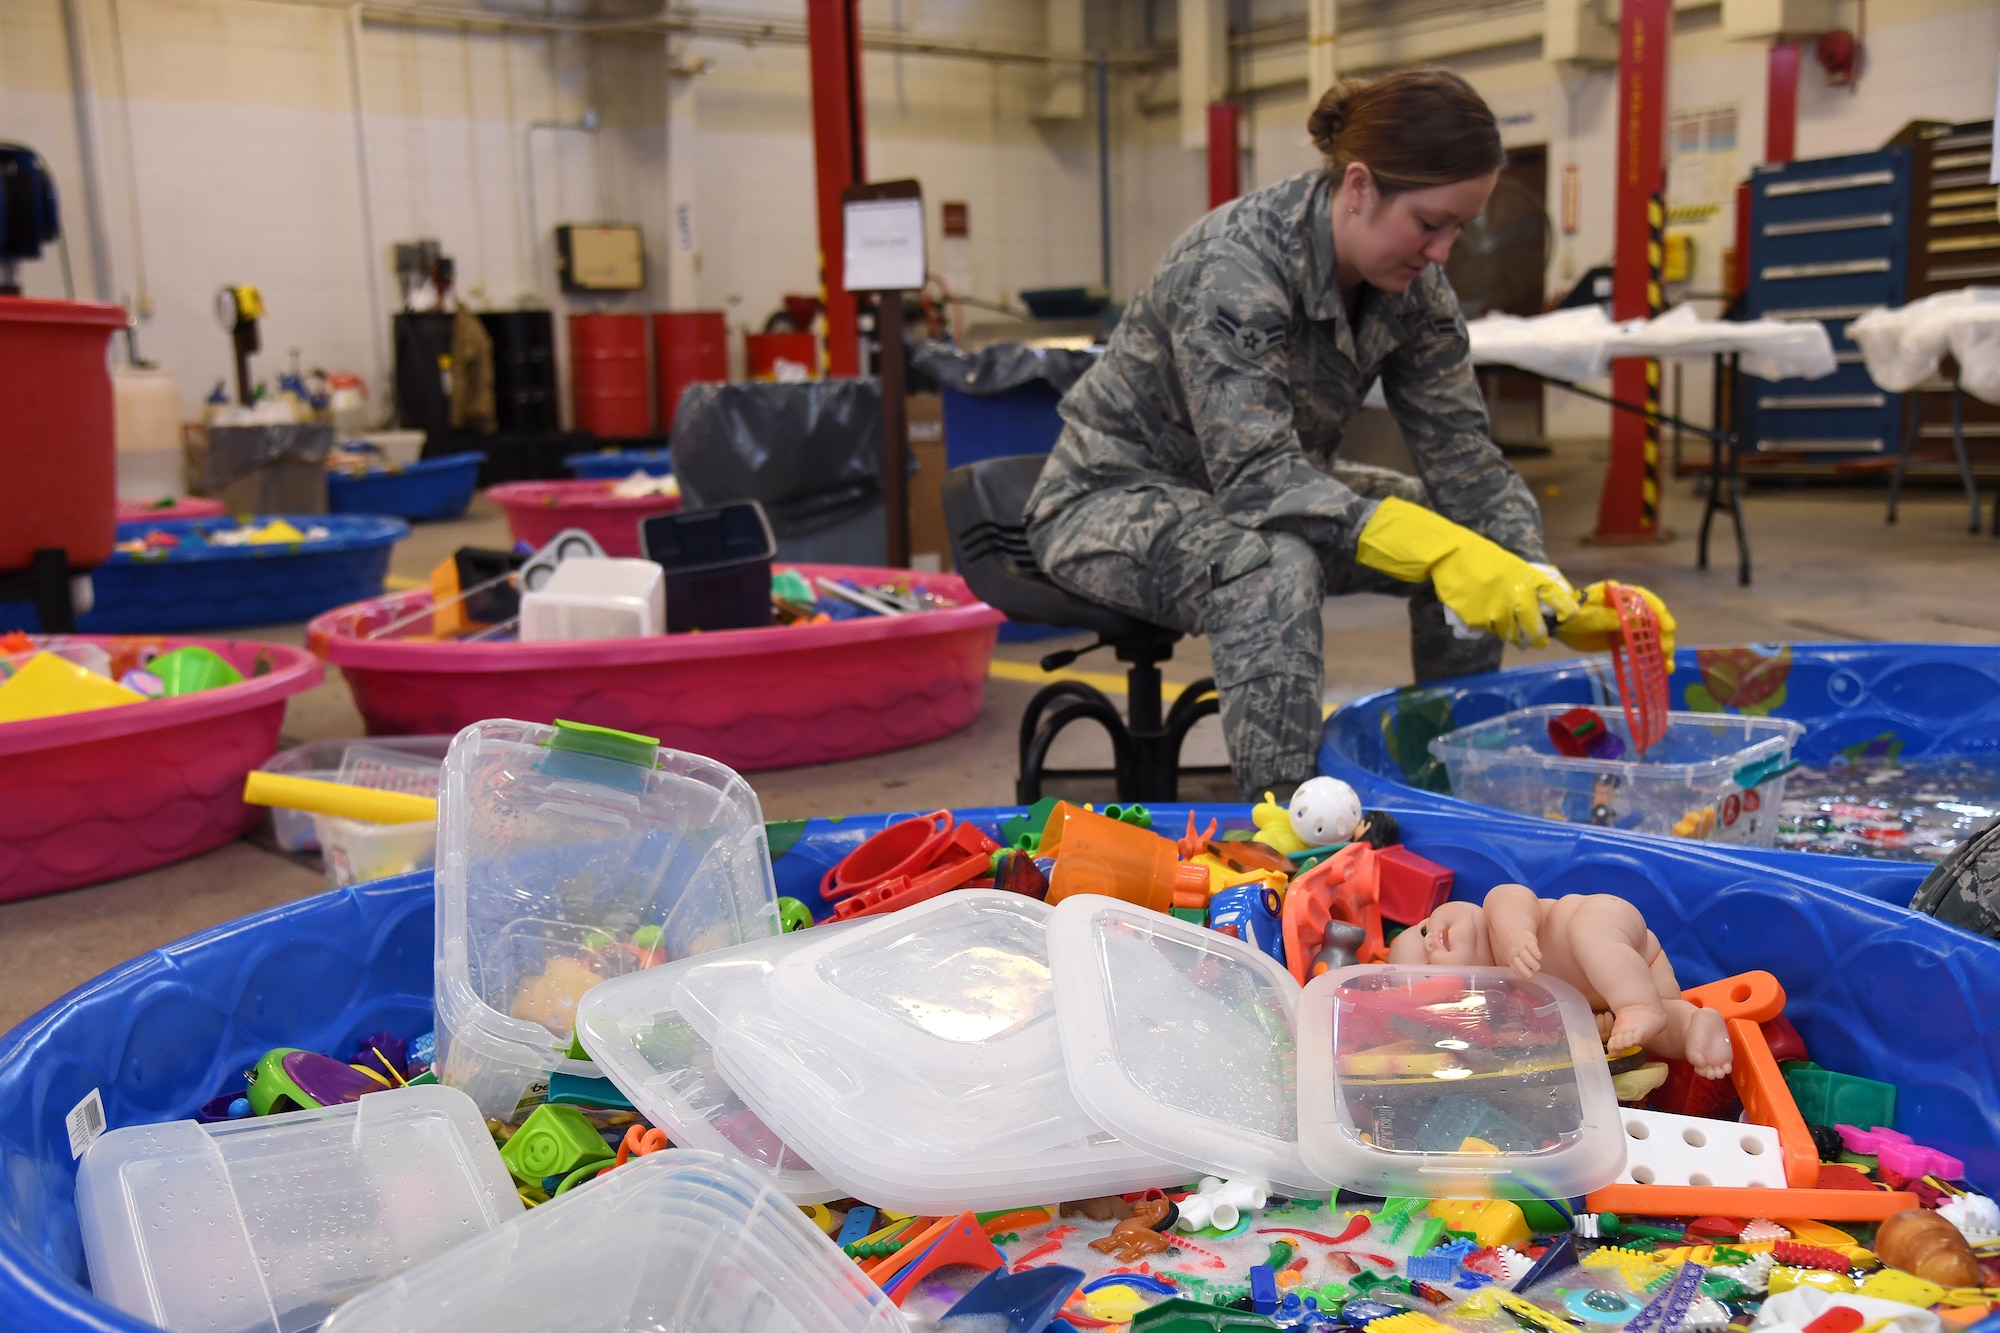 Airman 1st Class Gianna Leupp, 319th Logistics Readiness Squadron customer service representative, scrubs toys from the base Child Development Center and Youth Programs in a bath of soapy water January 18, 2019, on Grand Forks Air Force Base, North Dakota. After several base members contracted a highly-contagious gastrointestinal virus, base public health advised all public-access toys were soaked in a bleach solution prior to being scrubbed in soapy water, rinsed in clean water and air-dried in order to be properly sanitized. (U.S. Air Force photo by Senior Airman Elora J. Martinez)